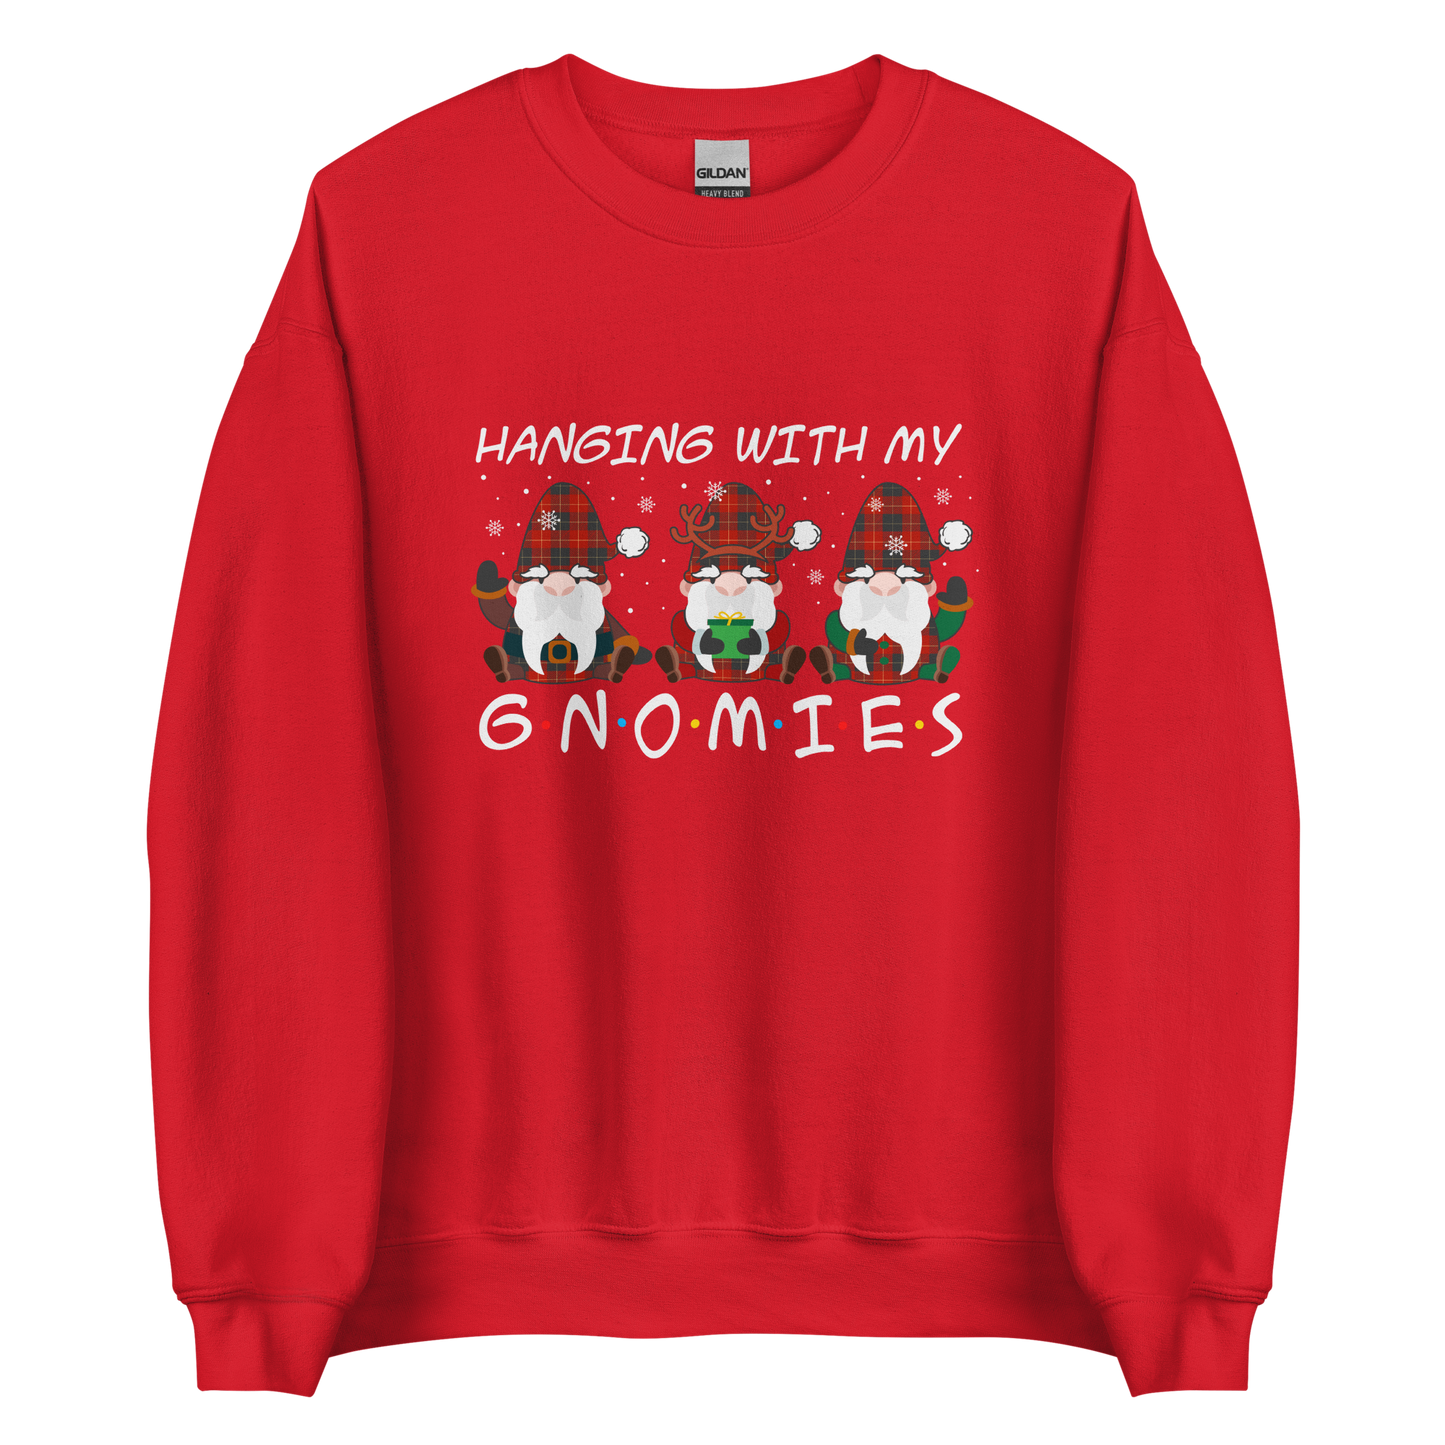 Red Christmas Gnome Sweatshirt featuring a delight Hanging With My Gnomies graphic on the chest - Funny Christmas Graphic Gnome Sweatshirts - Boozy Fox